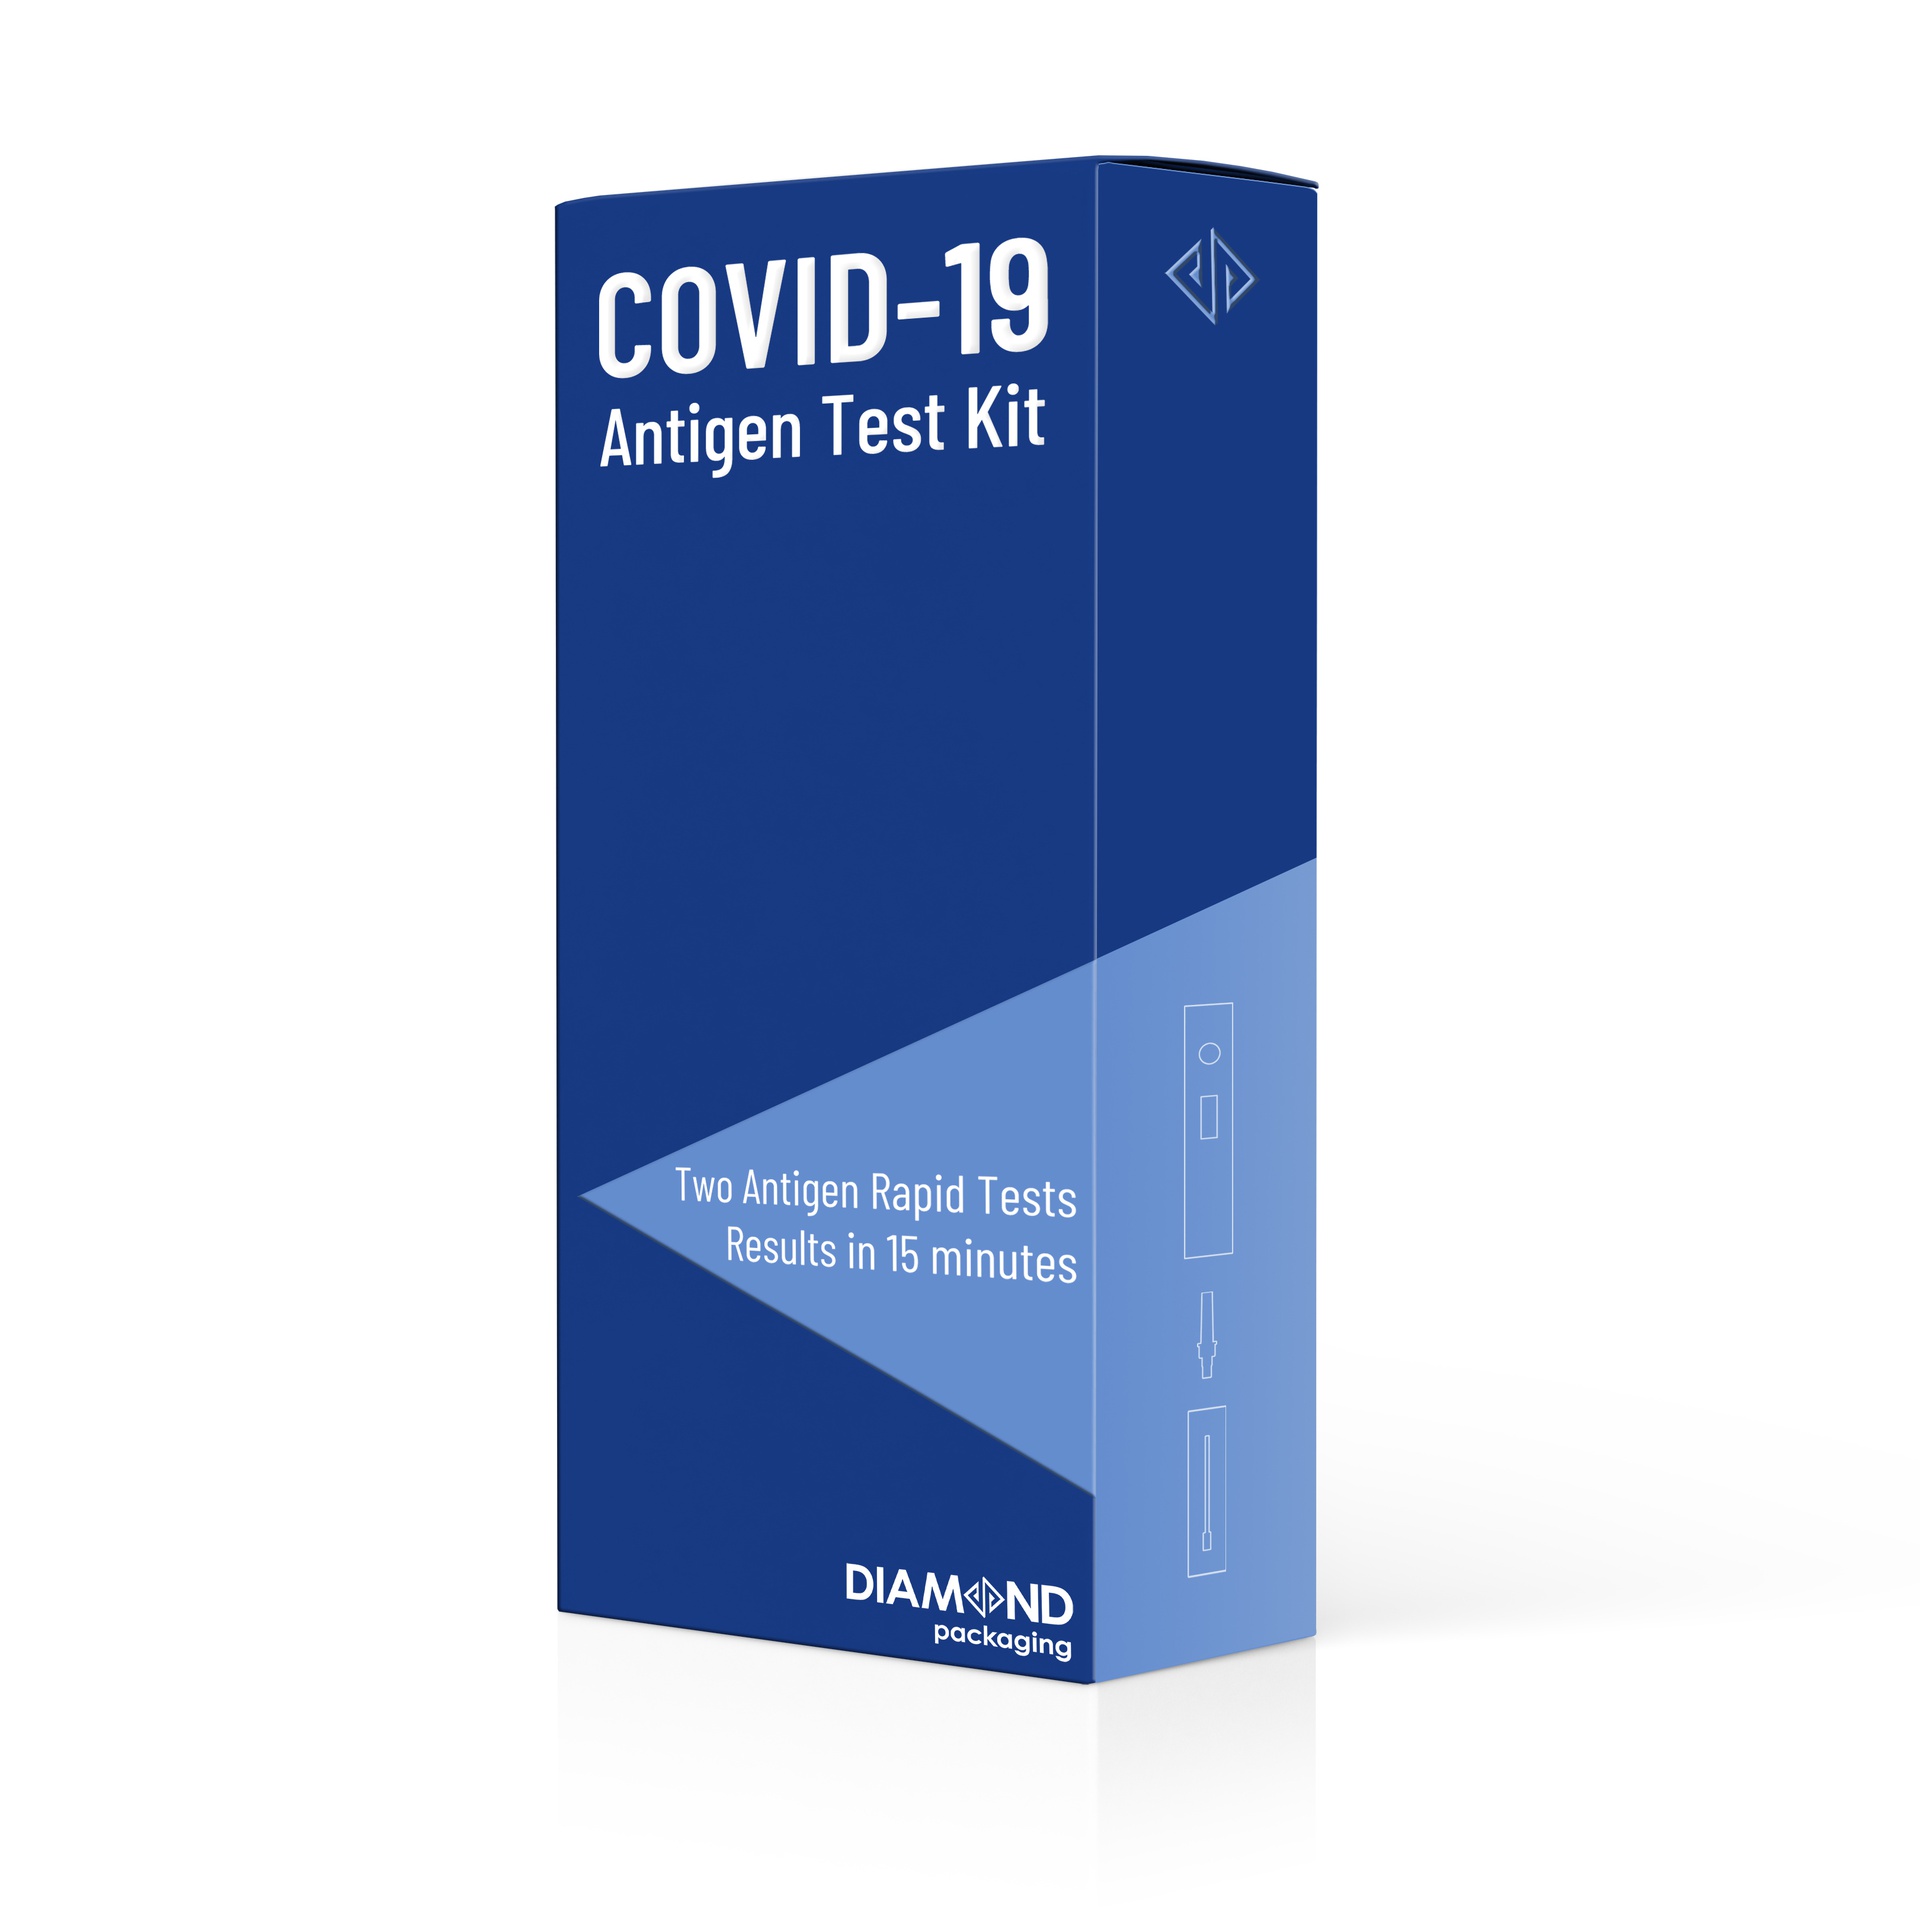 COVID-19 test kit packaging